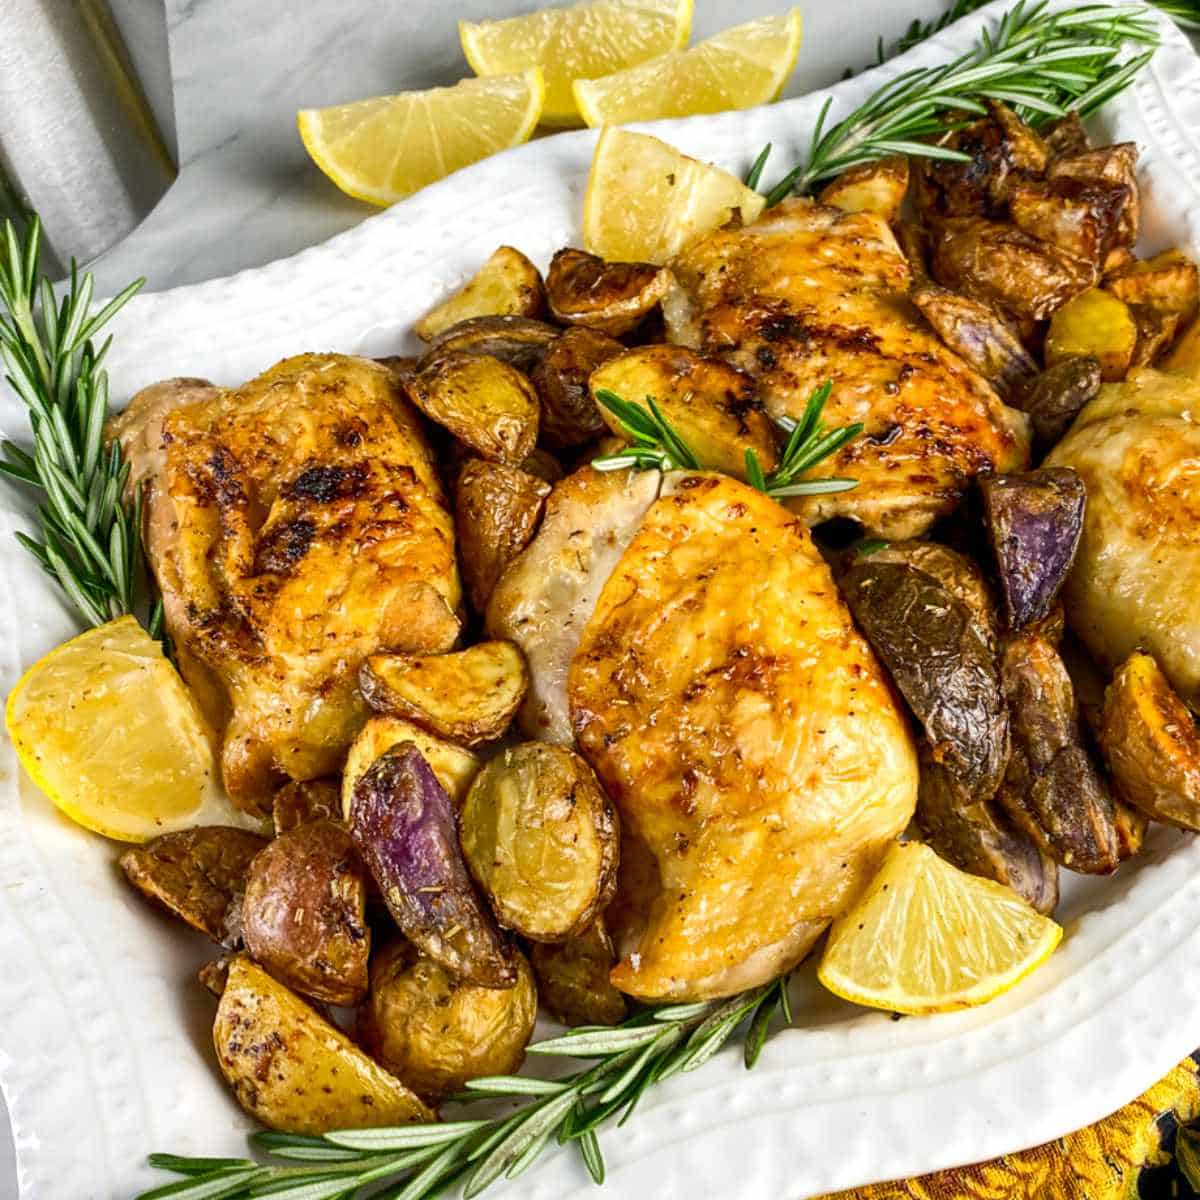 White serving platter filled with air fried chicken thighs with small red potatoes, rosemary, and lemon wedges.